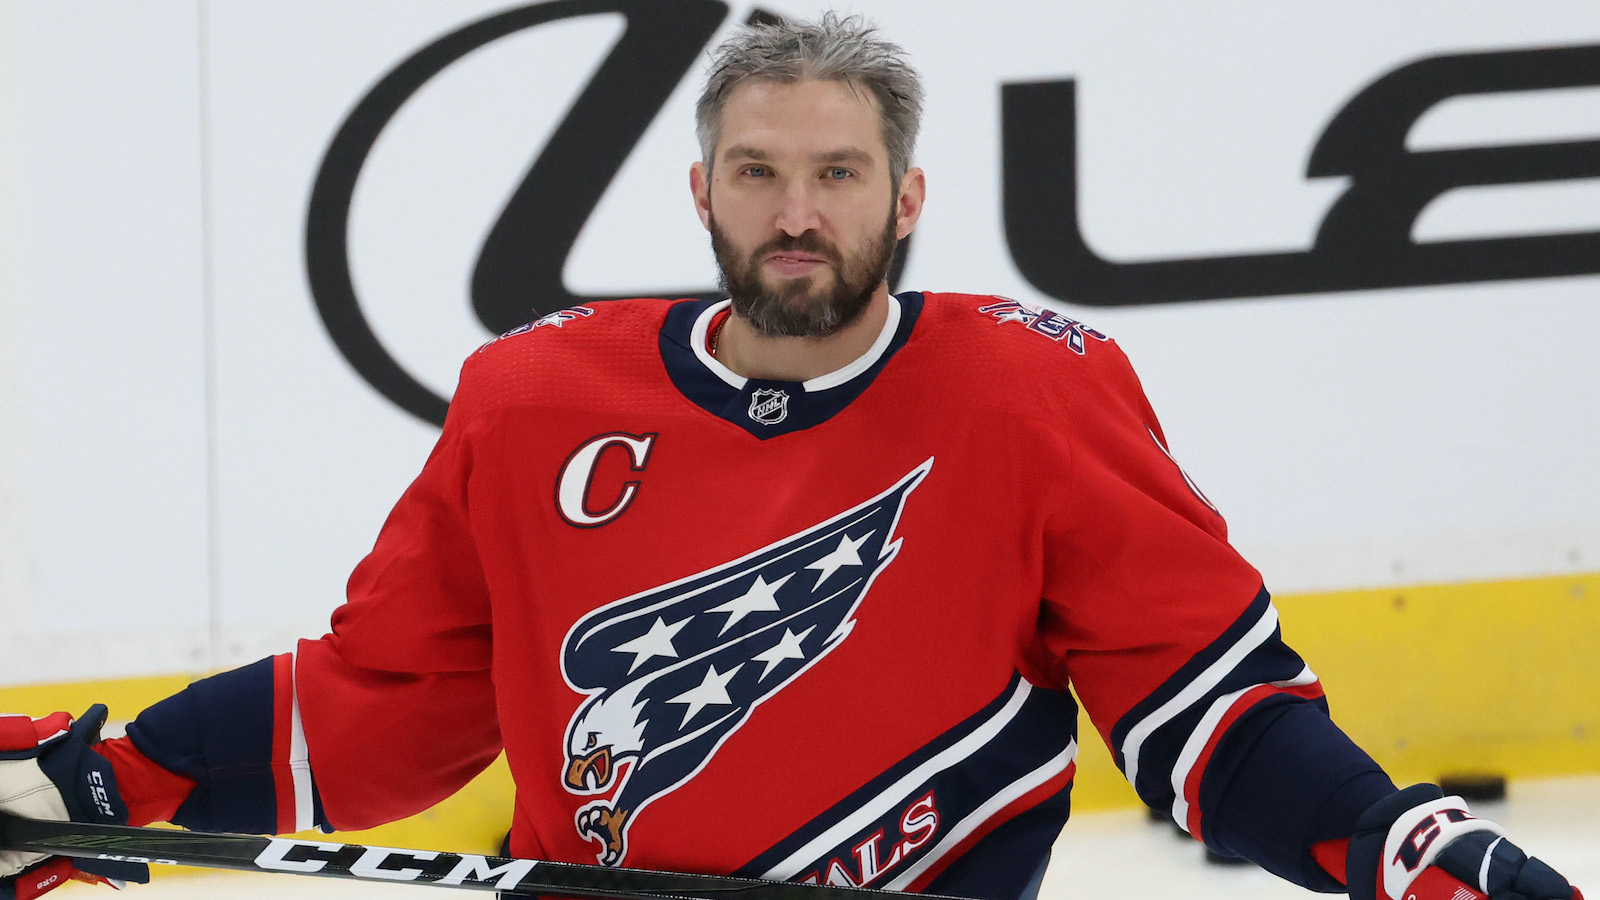 Alex Ovechkin away from Capitals due to death of his father - NBC Sports